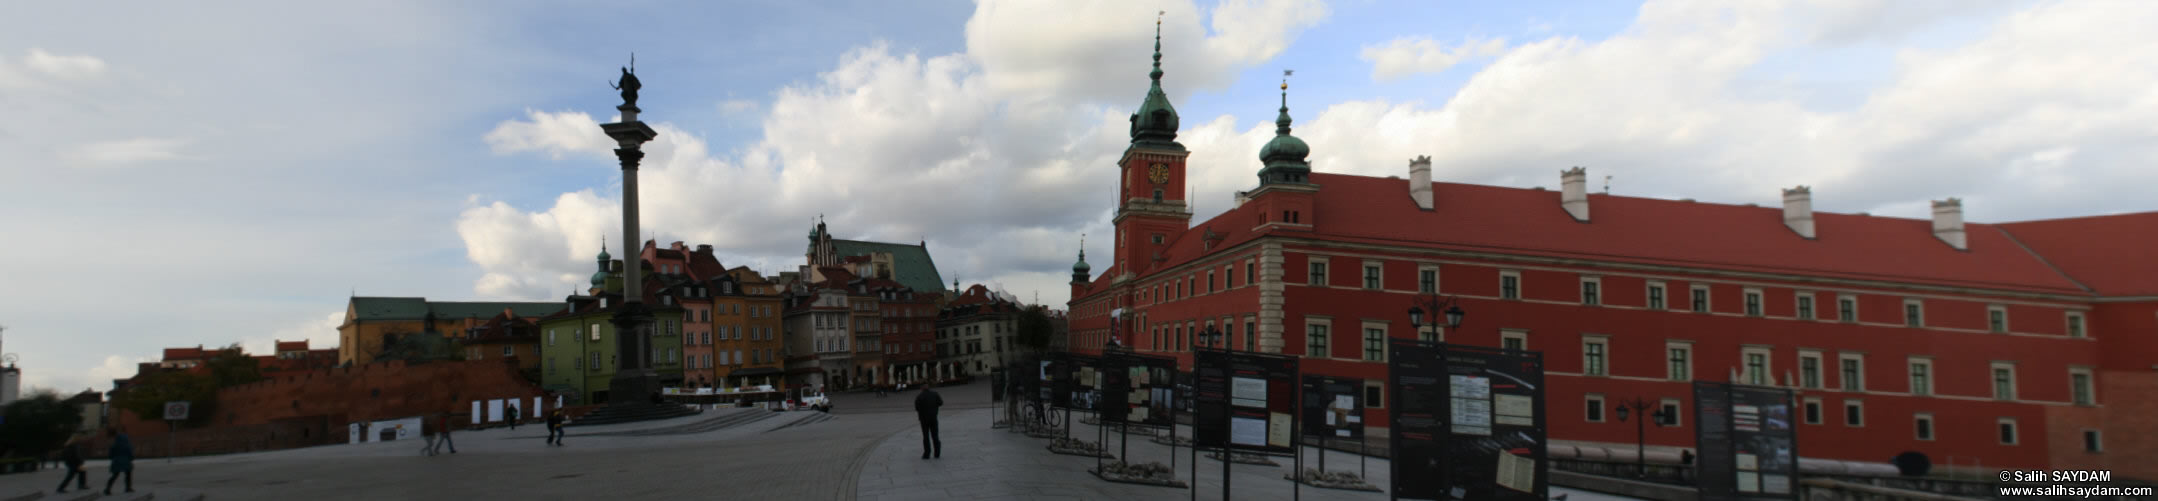 Old Town Panorama 11 (Castle Square, Warsaw, Poland)